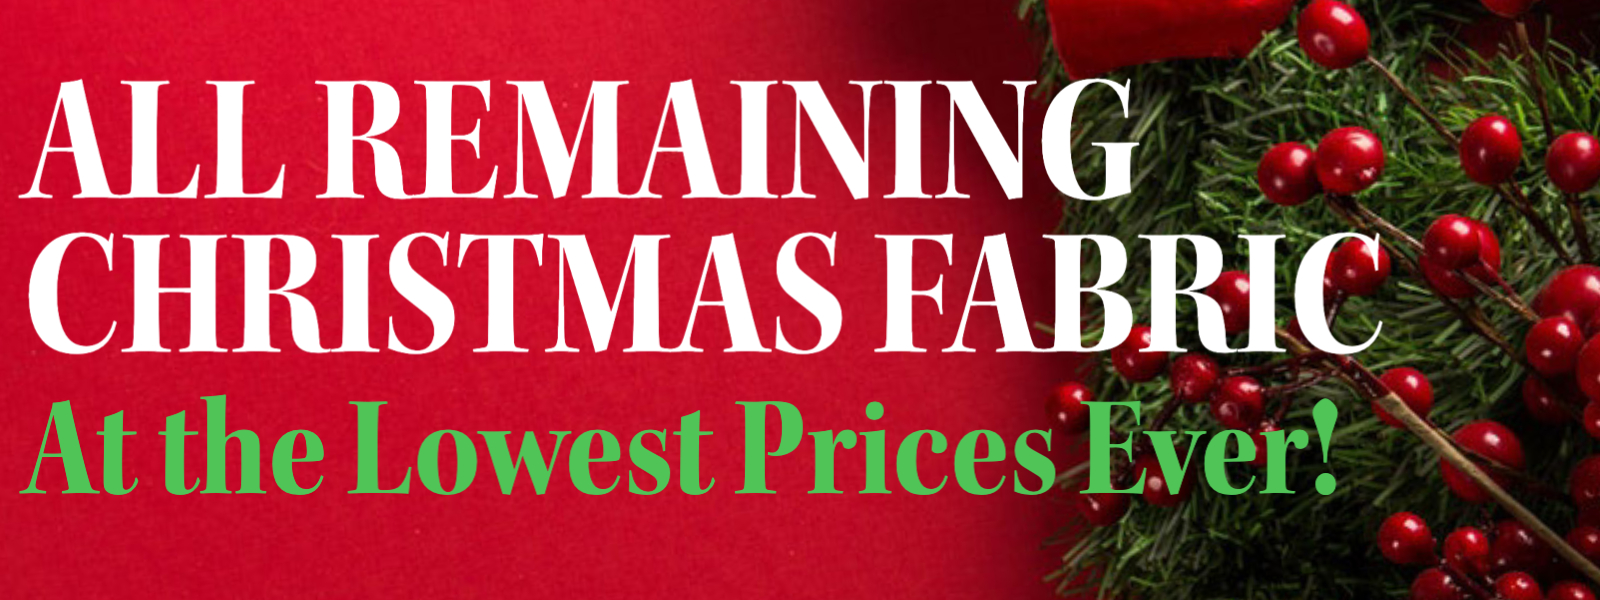 Christmas Fabric clearance priced